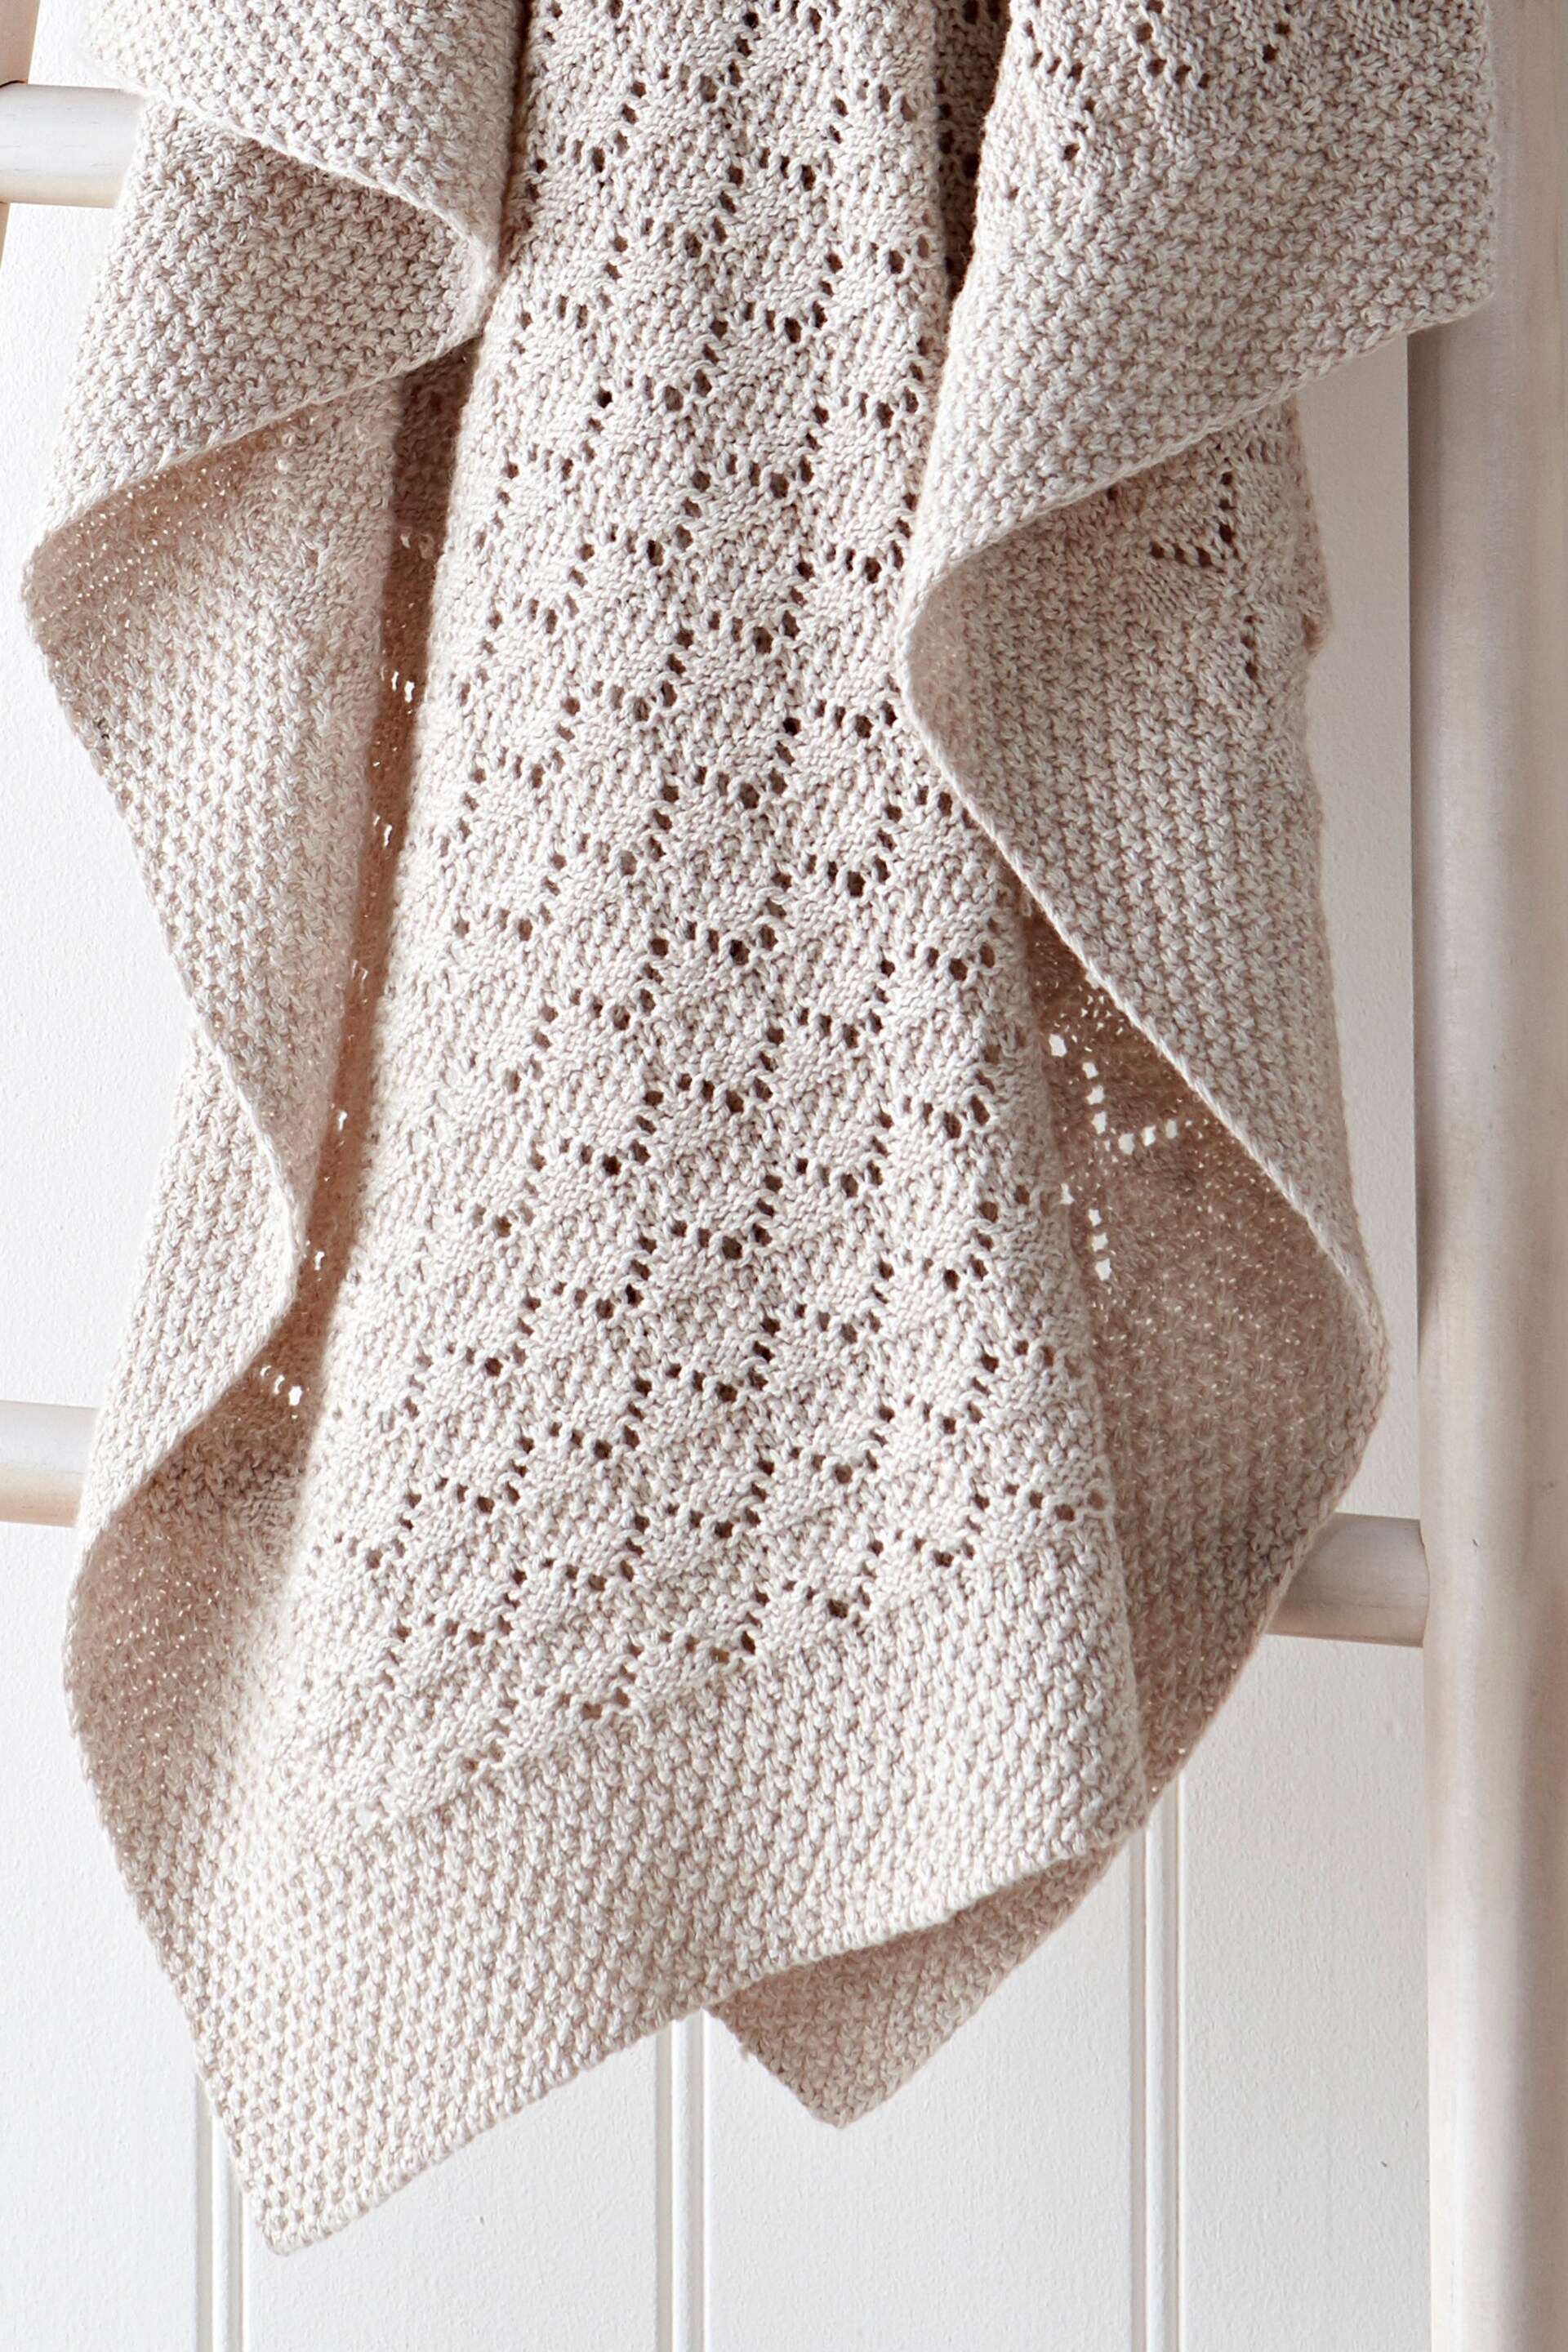 The White Company Natural Heirloom Natural Blanket - Image 2 of 2